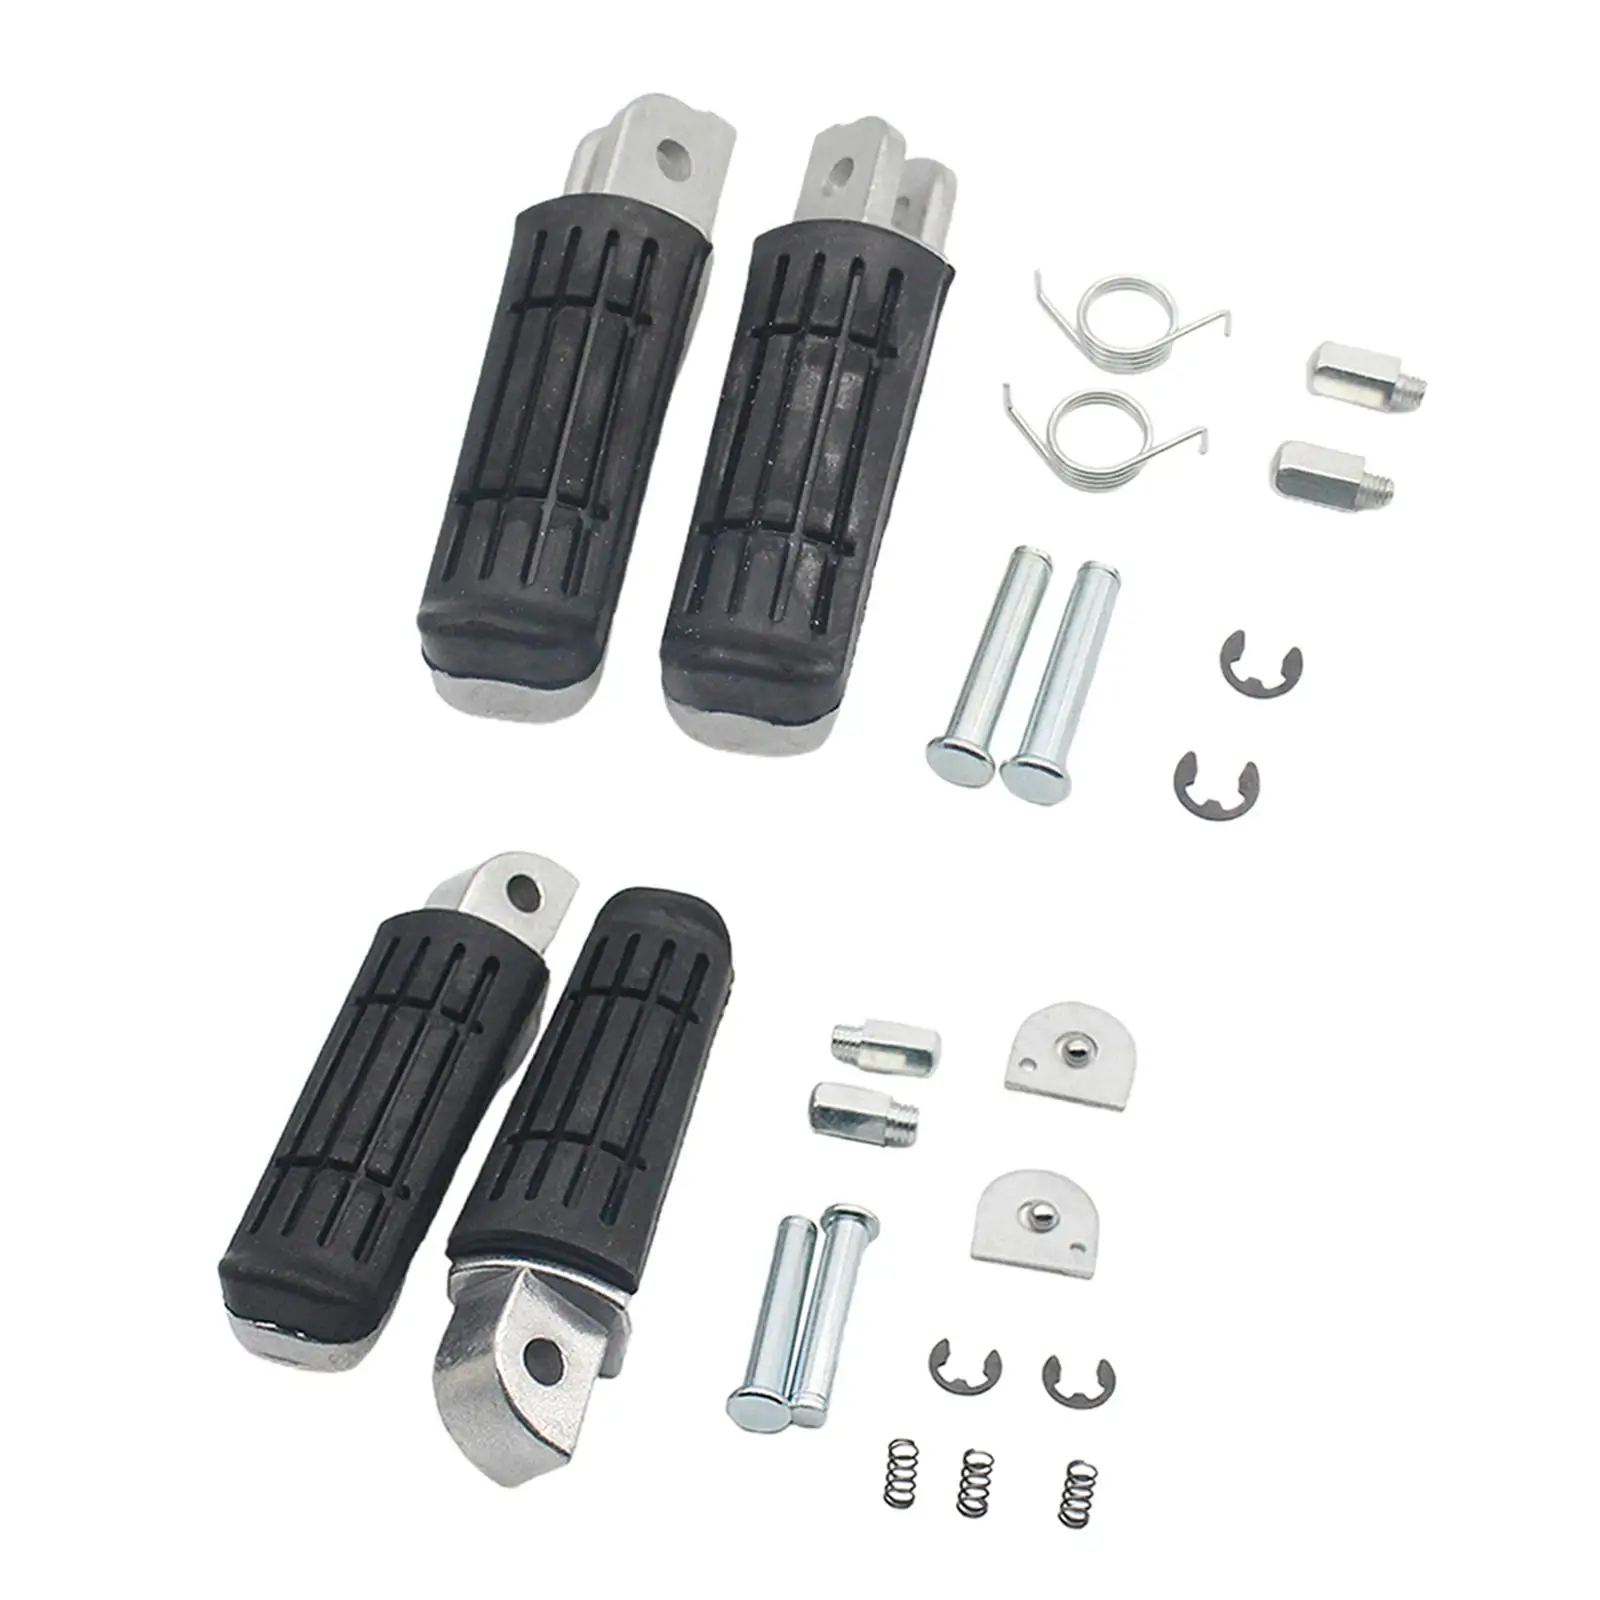 Pair Motorcycle Foot Pegs Footrest Compatible with YZF1000 R1 FZ6R FZ6 FJR1300